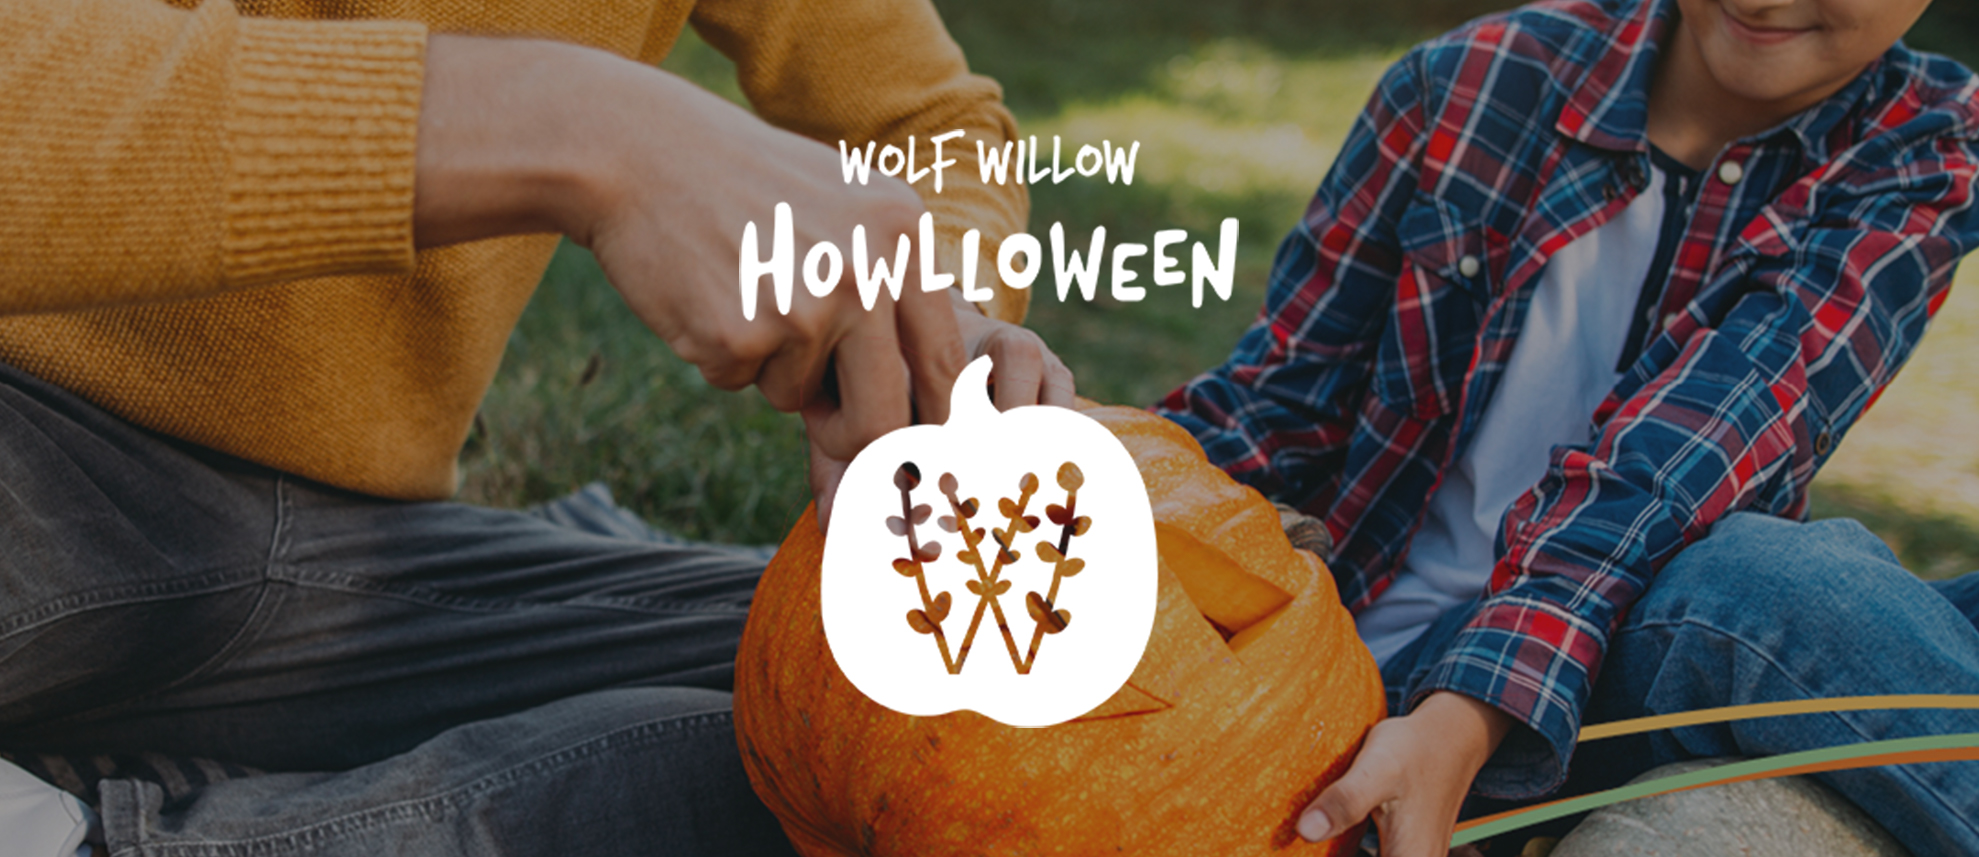 Text reading Wolf Willow Howloween over a photo of pumpkin carving.